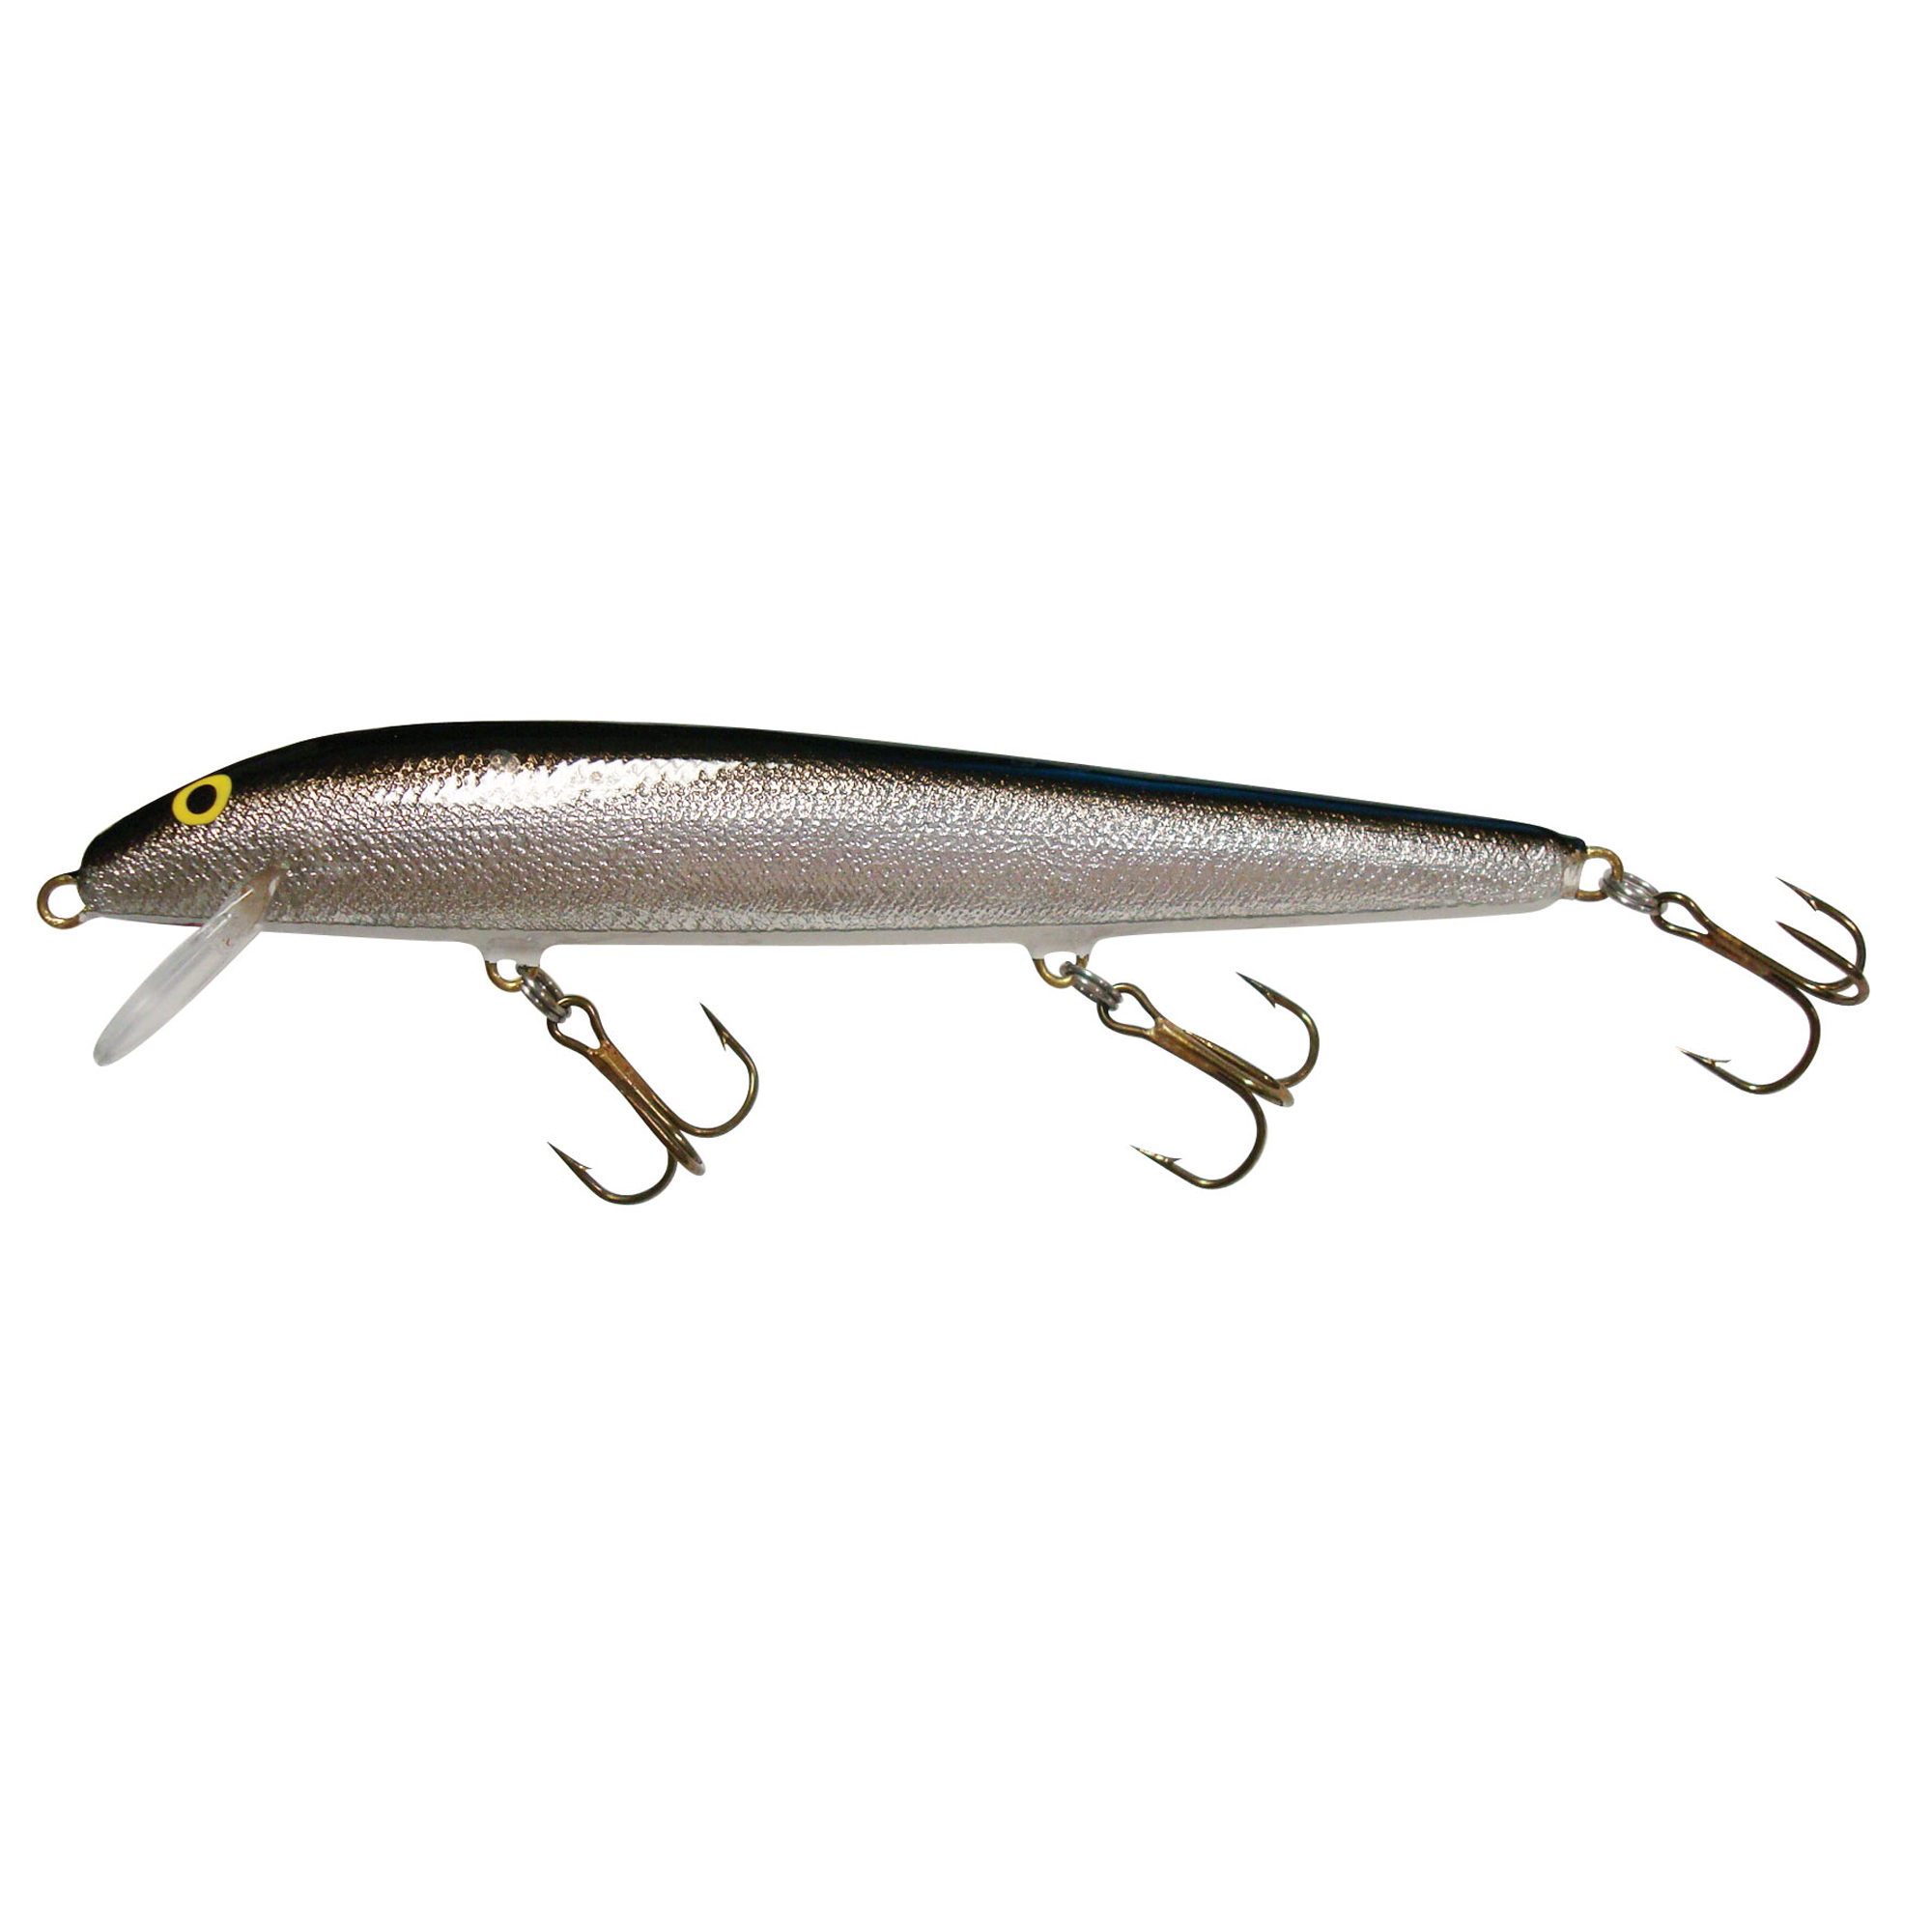 PIKE/MUSKIE AC Model 550 Shiner 5 1/2" Wood Shallow Minnow in GOLD/BLACK BACK 